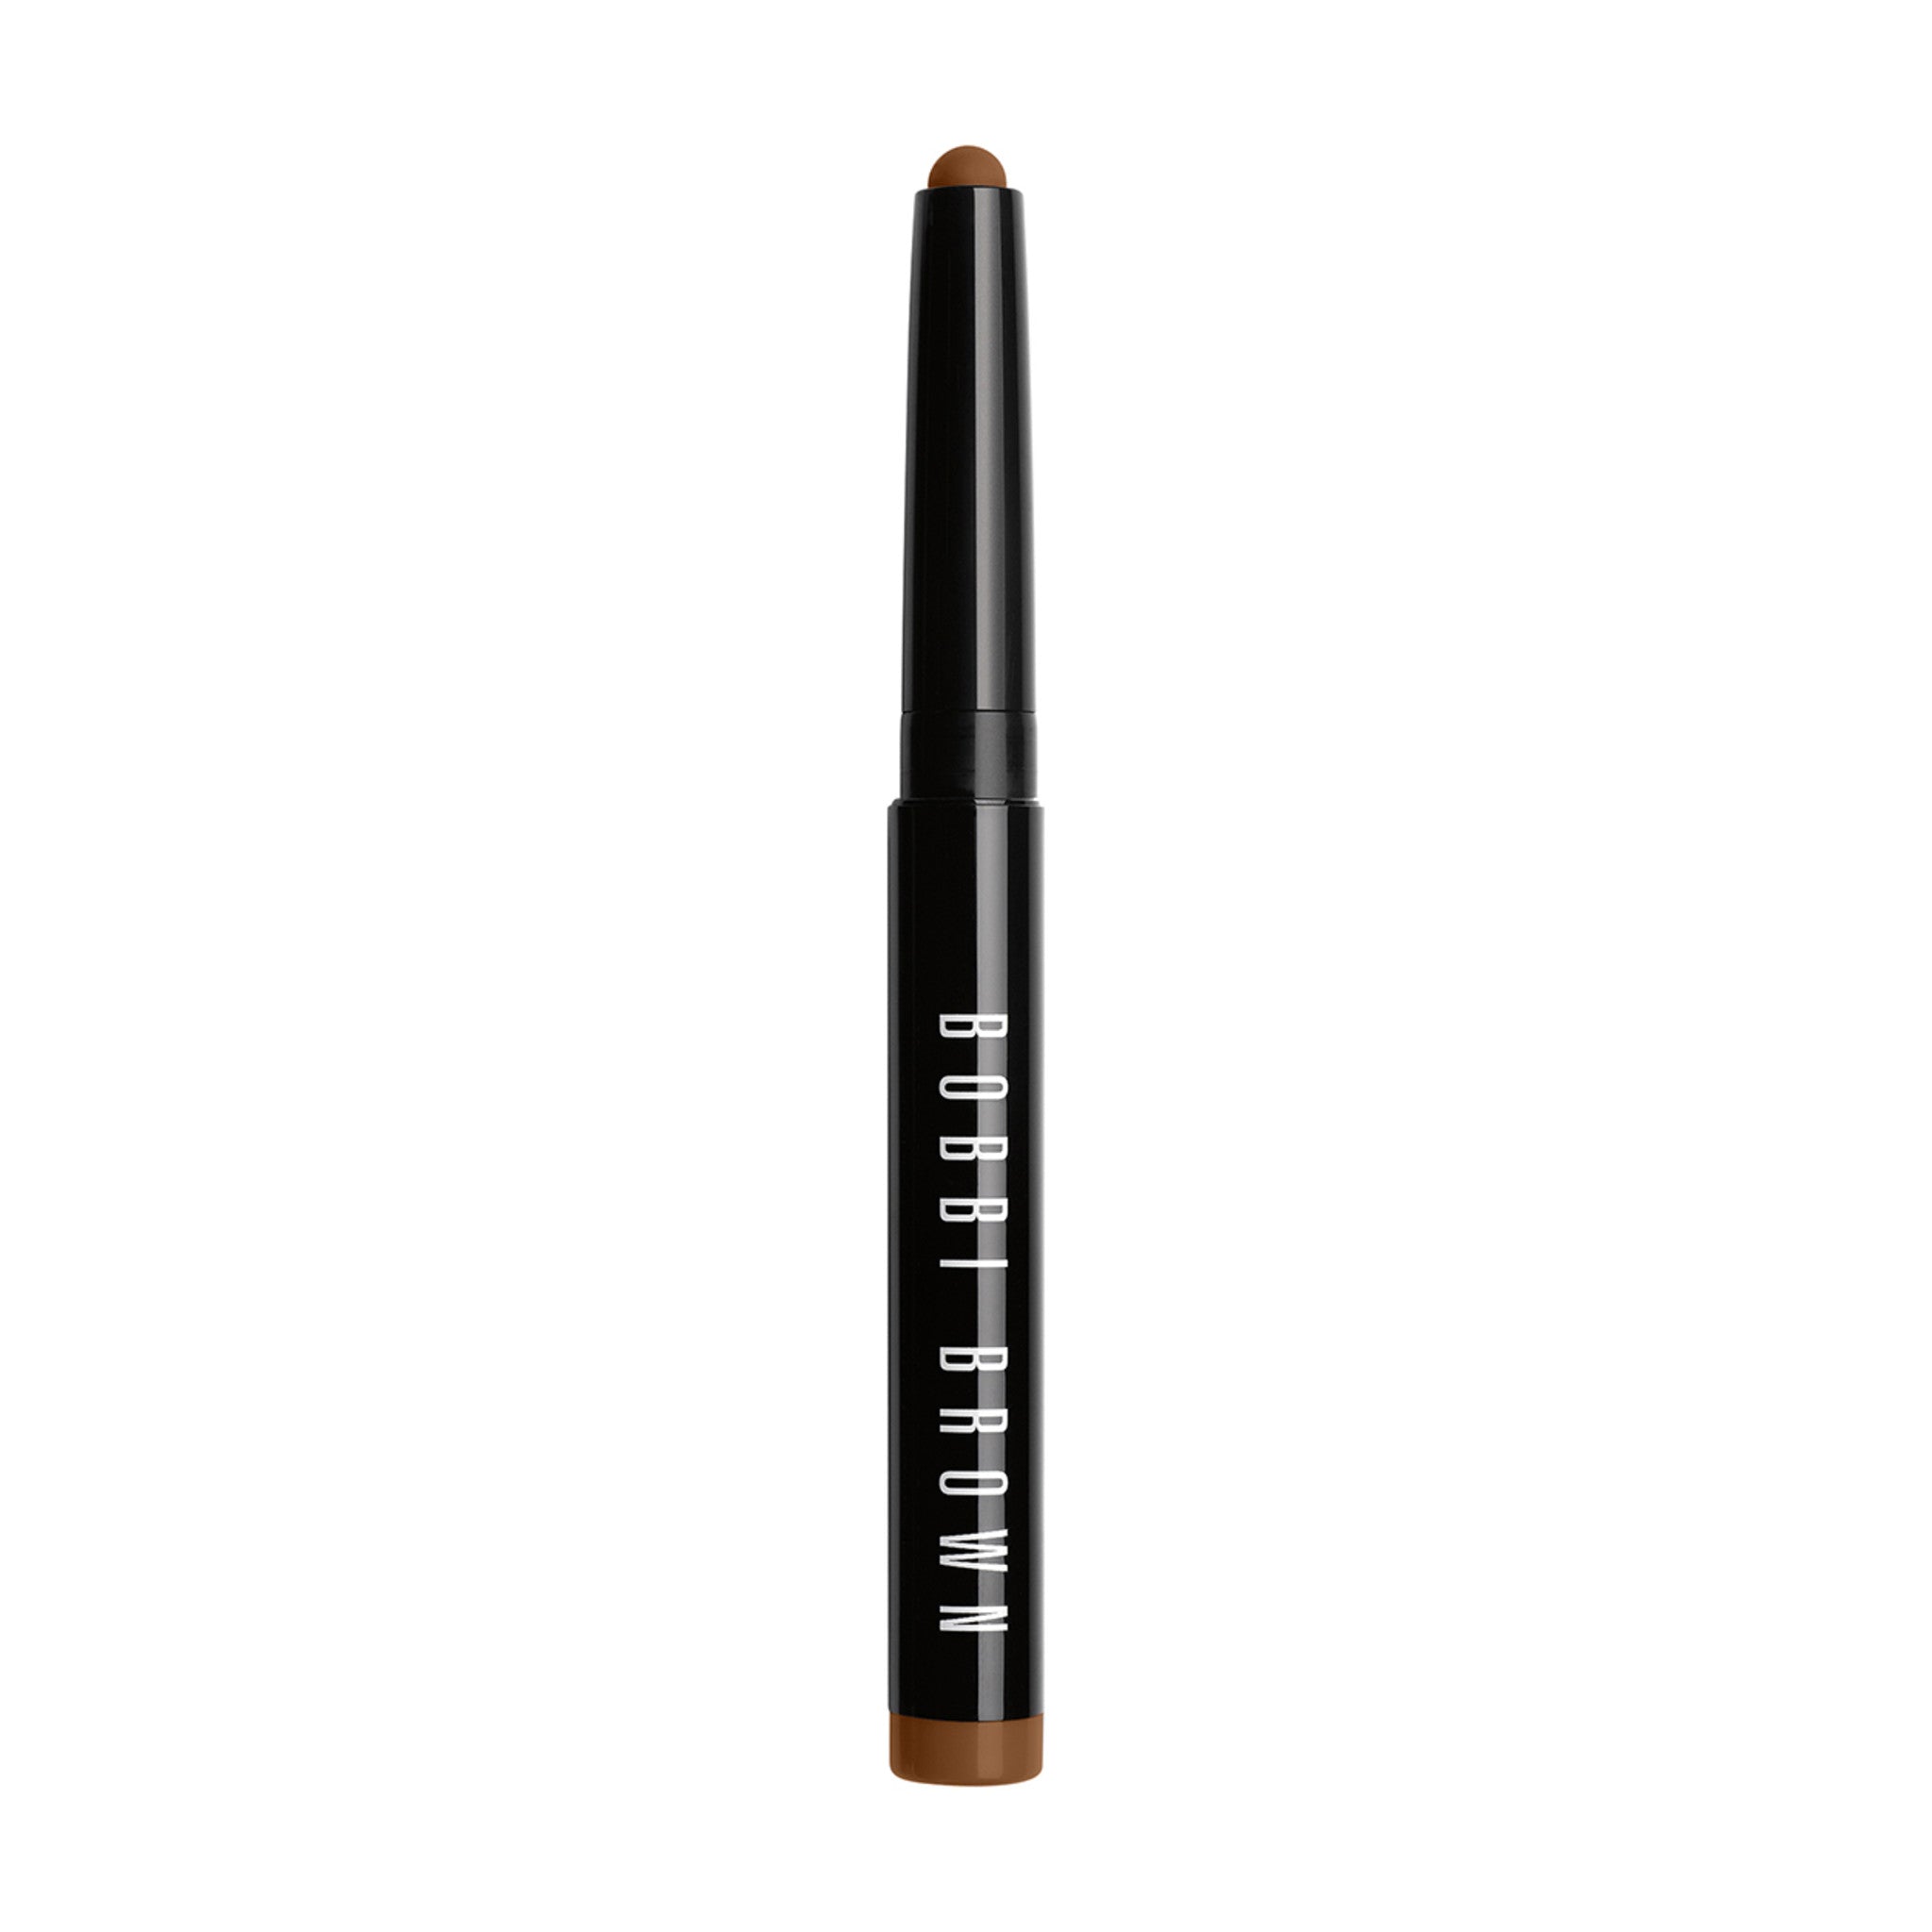 Bobbi Brown Long-Wear Cream Shadow Stick Color/Shade variant: Golden Bronze main image. This product is in the color bronze